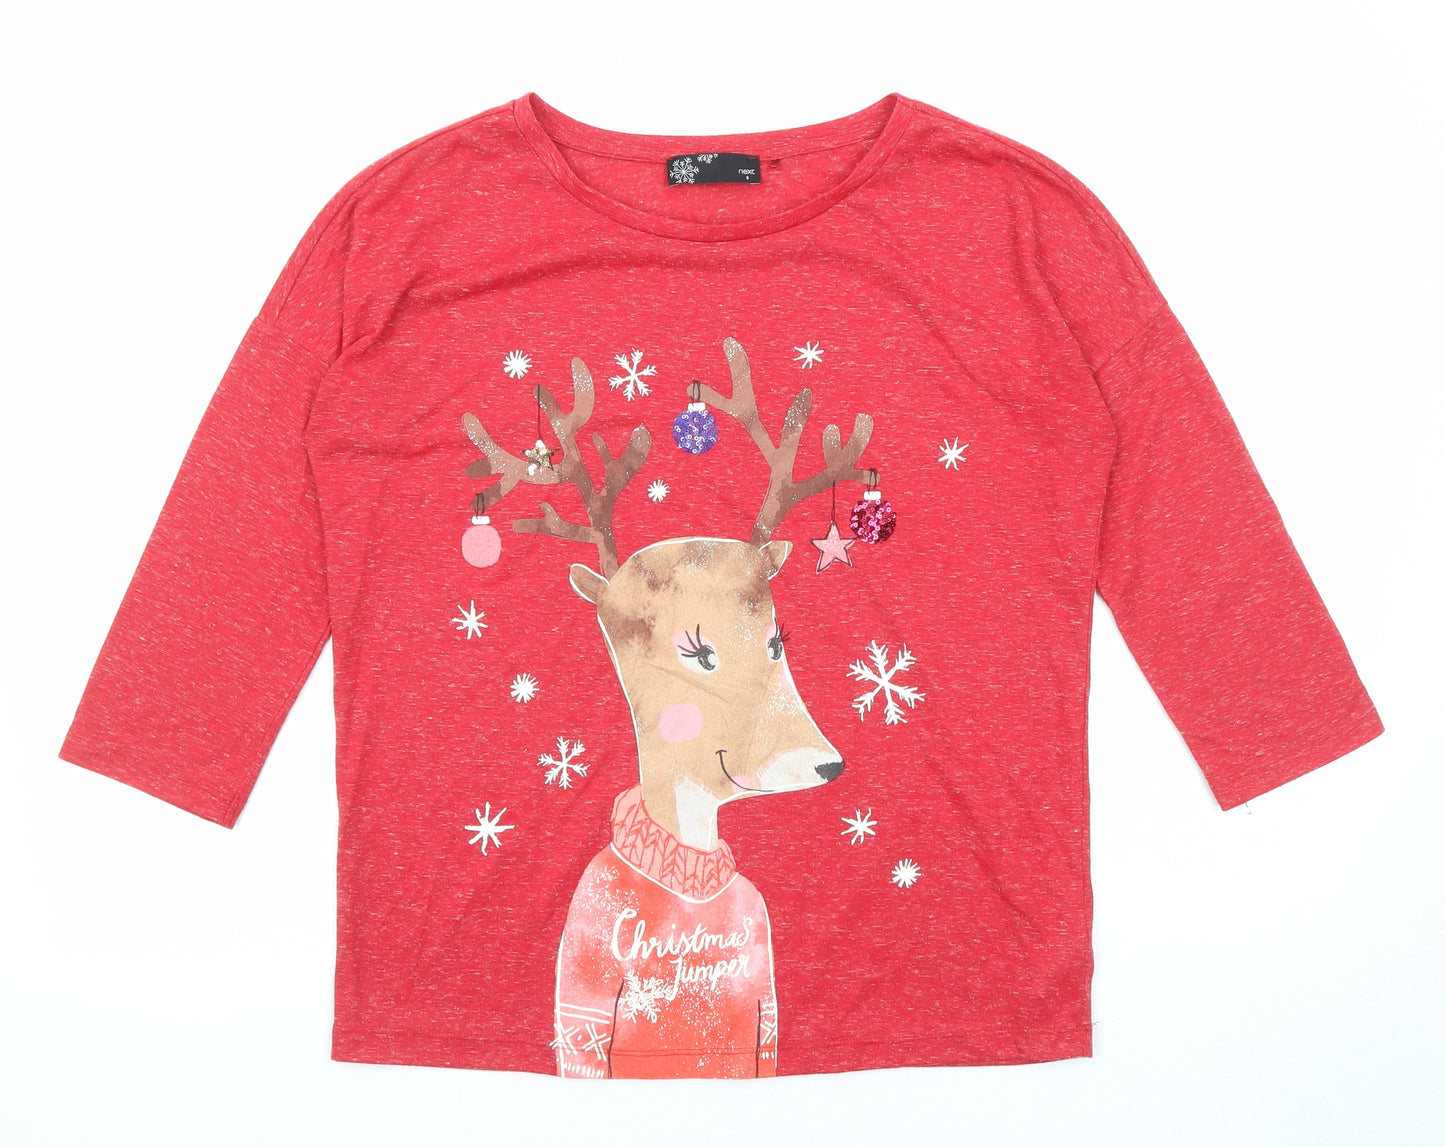 NEXT Womens Red Polyester Basic T-Shirt Size 8 Round Neck - Reindeer Christmas